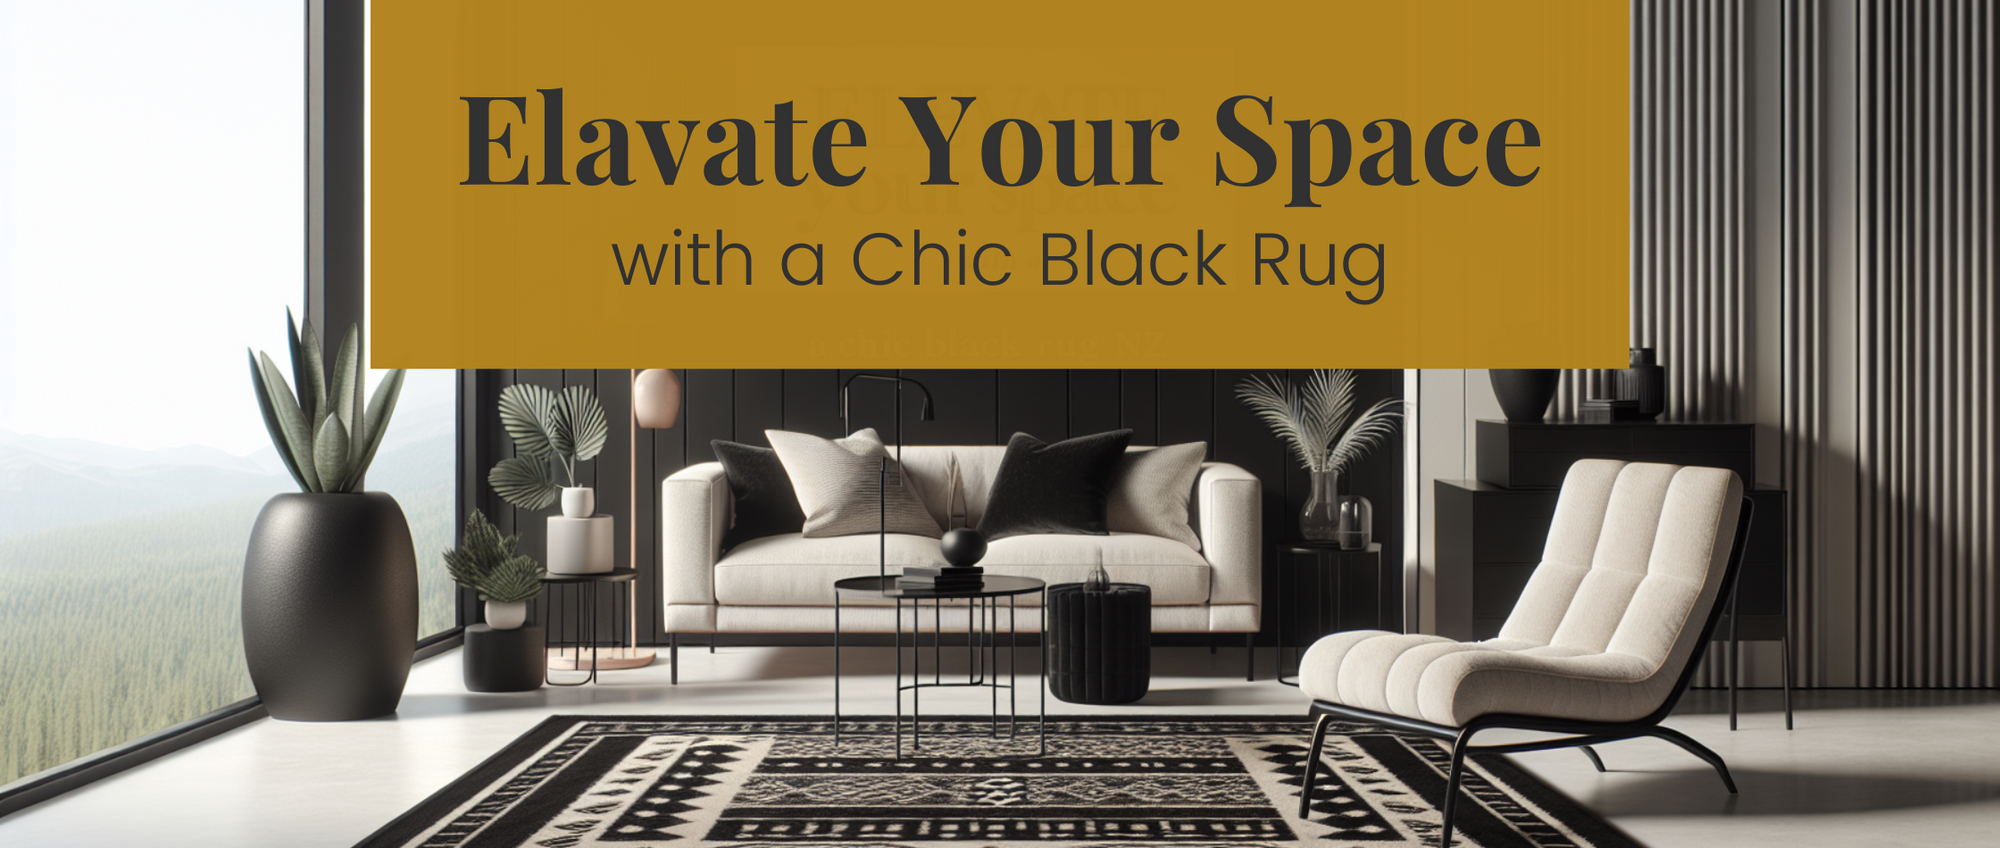 Elevate Your Space with a Chic Black Rug NZ